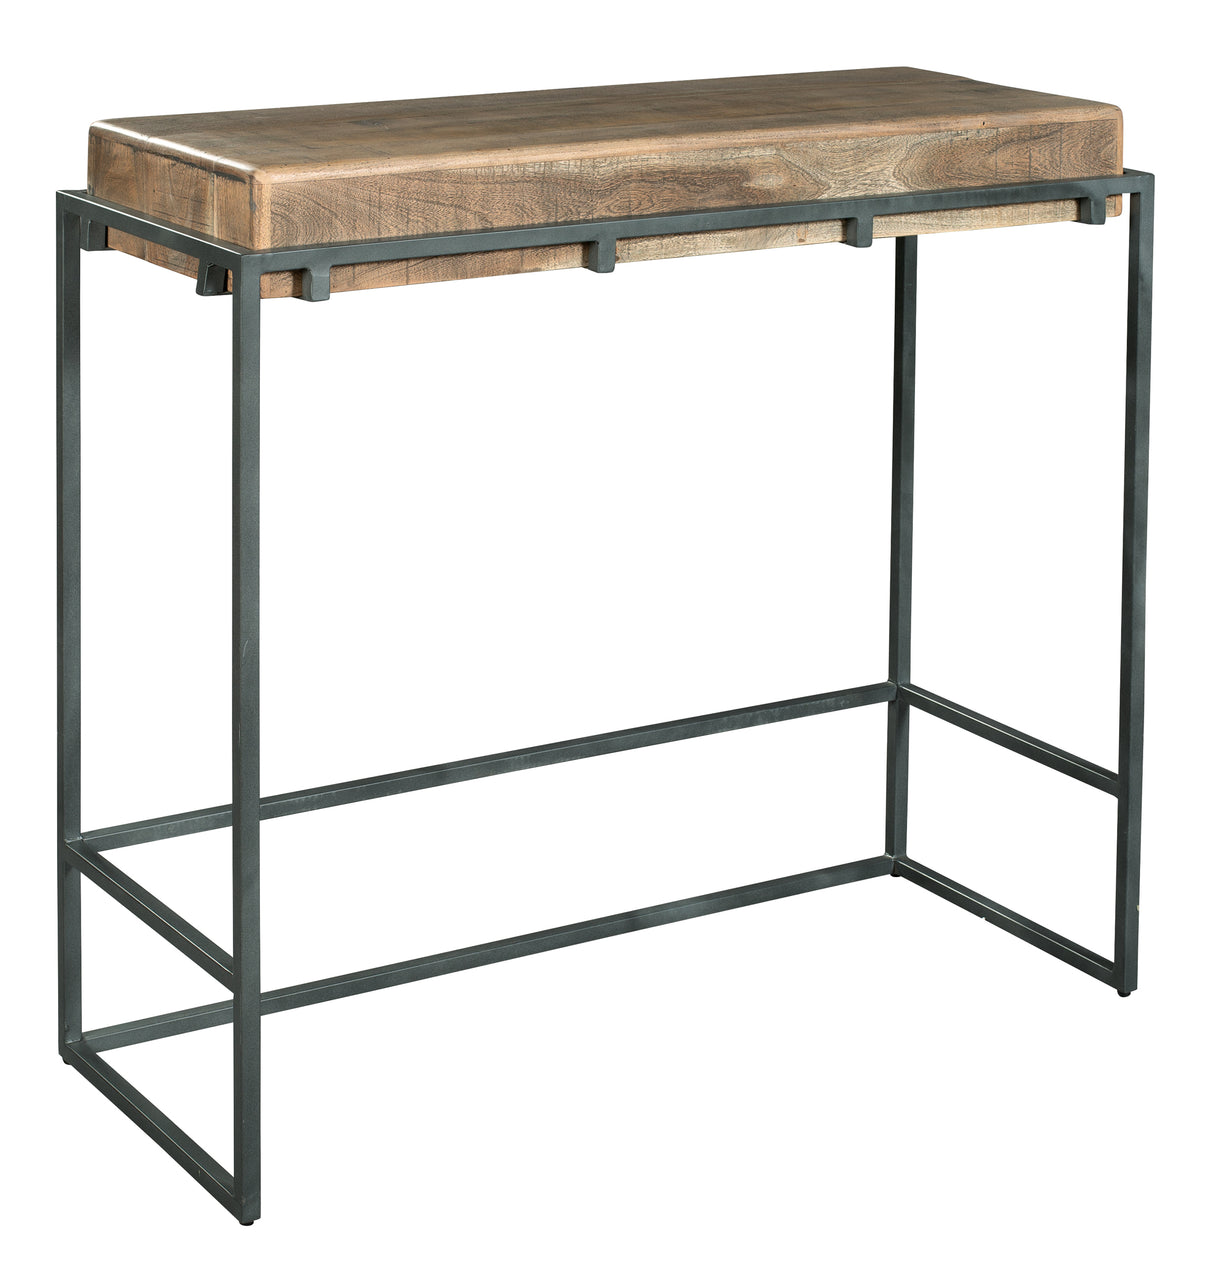 Hekman 28393 Accents 43in. x 17.25in. x 42.5in. Pub Table